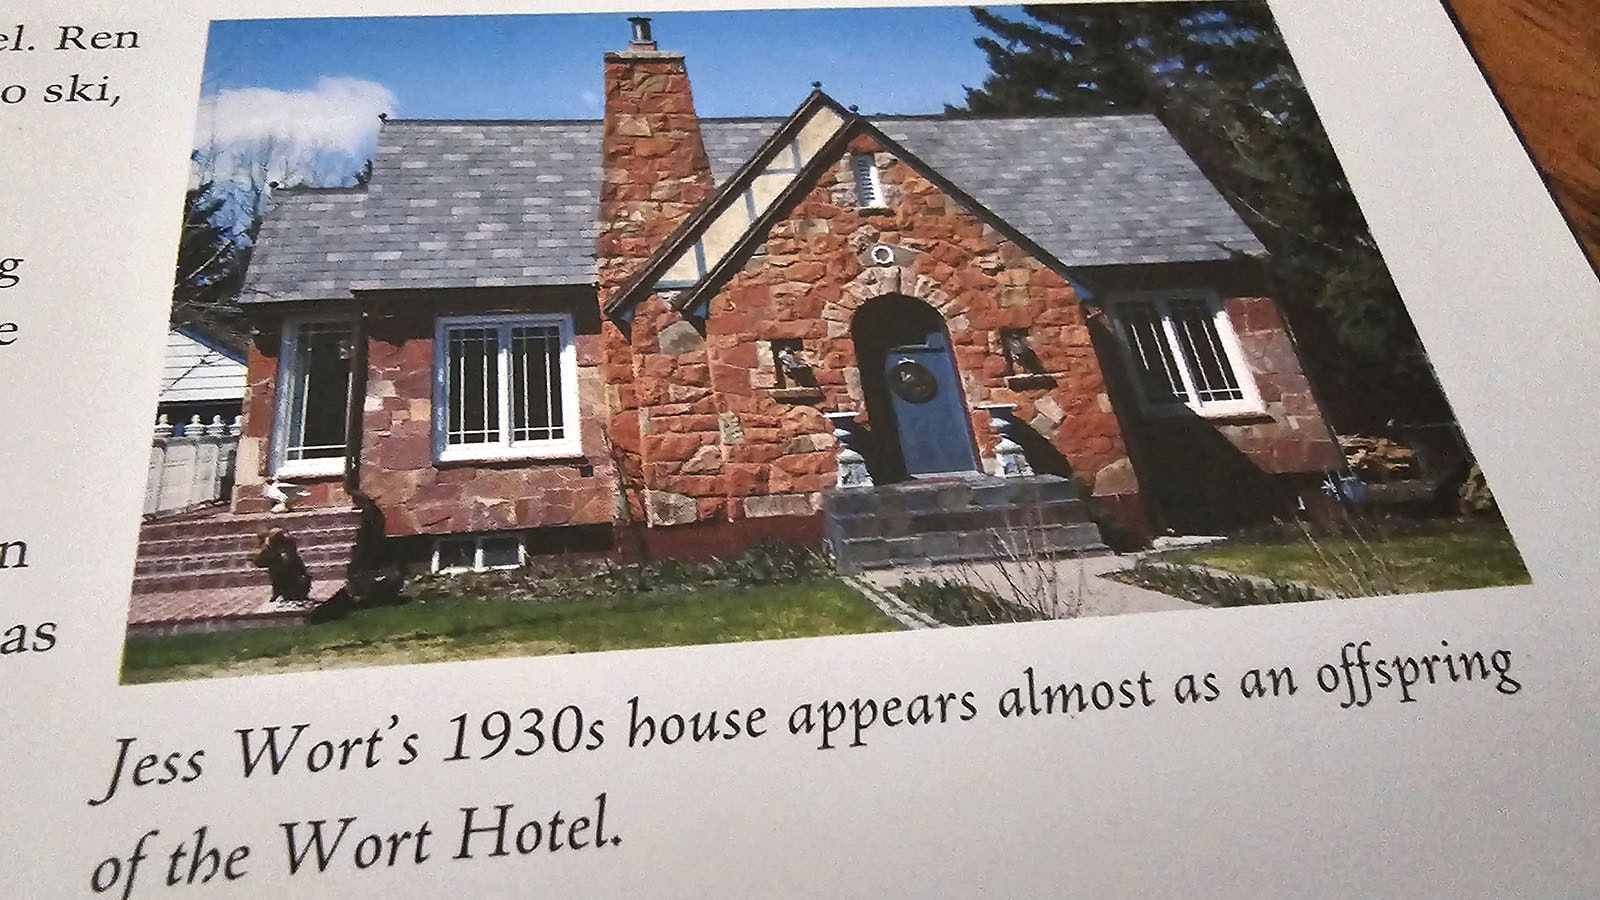 The distinct sloping lines of Jess Wort's 1930s house are recognizable in the the famous Wort Hotel in Jackson as well.